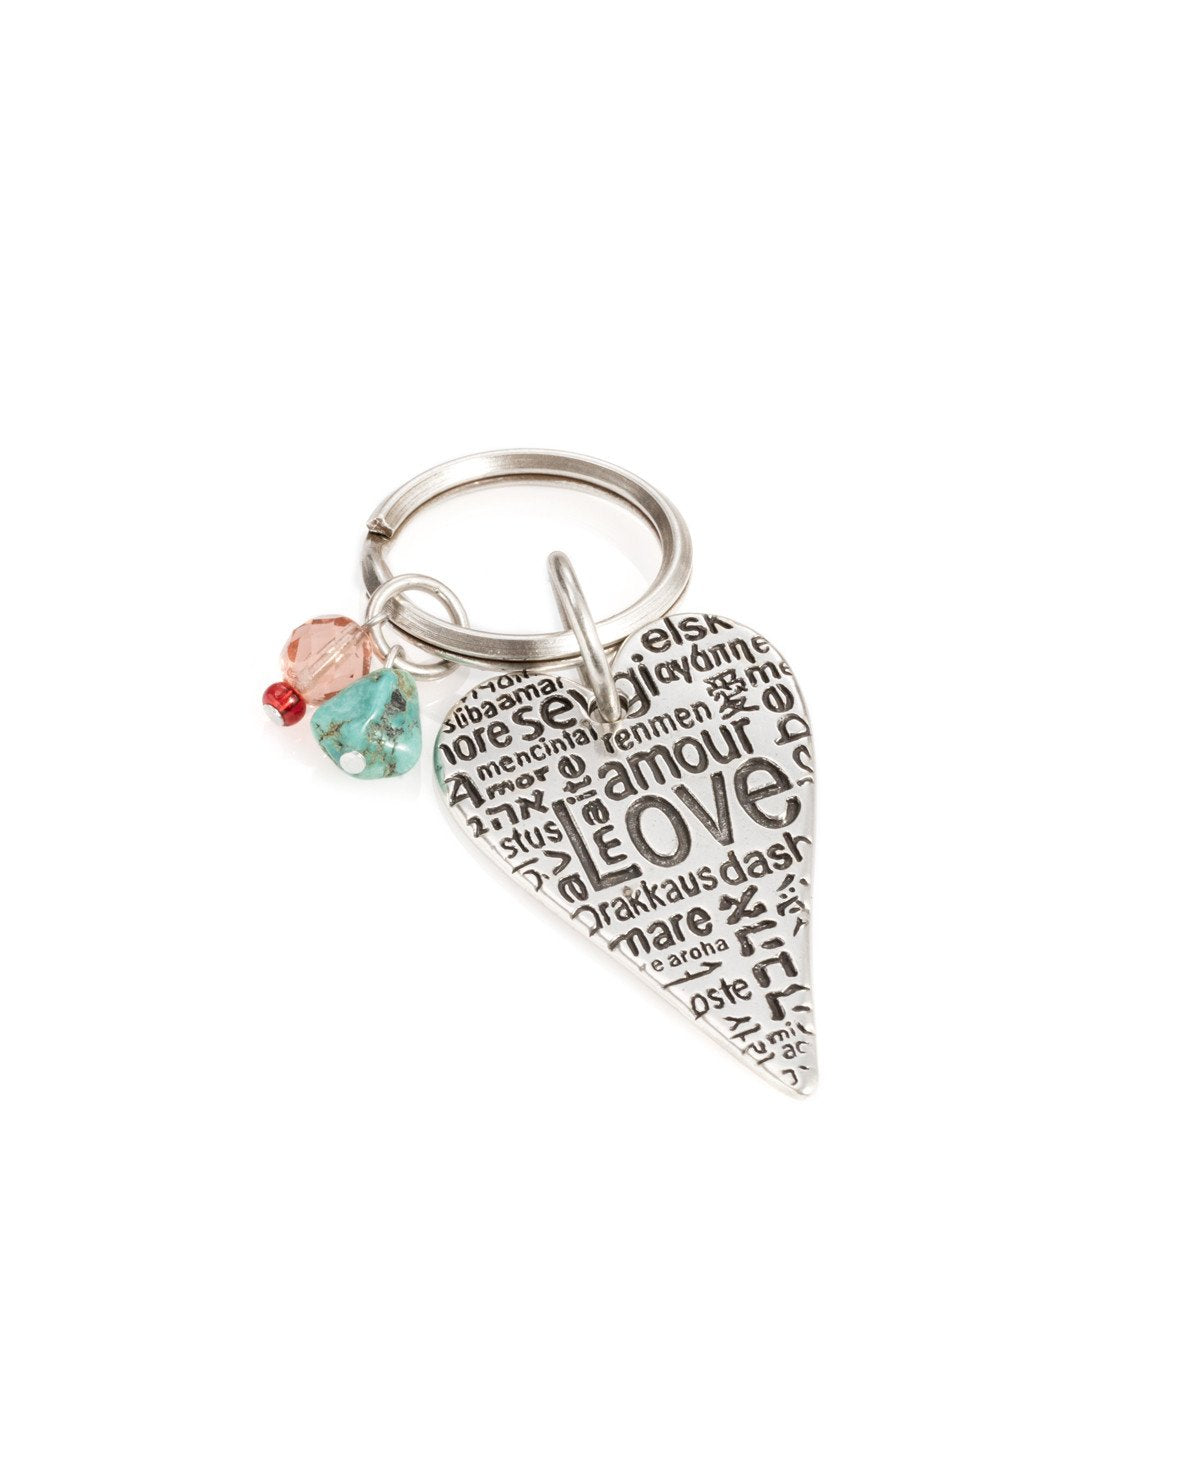 A one of a kind keychain that crosses borders and brings hearts together. Designed as an elongated heart coated in sterling silver, upon which the word "Love" is written in different languages. Hanging on the keyring next to the heart are two colorful beads that add beauty and intrigue. The keychain is strong and reliable. Makes a great gift of love, anywhere and at any time, so that in the moment of truth, you won't find yourself at a loss for words...  Length: 9 cm  Width: 3 cm